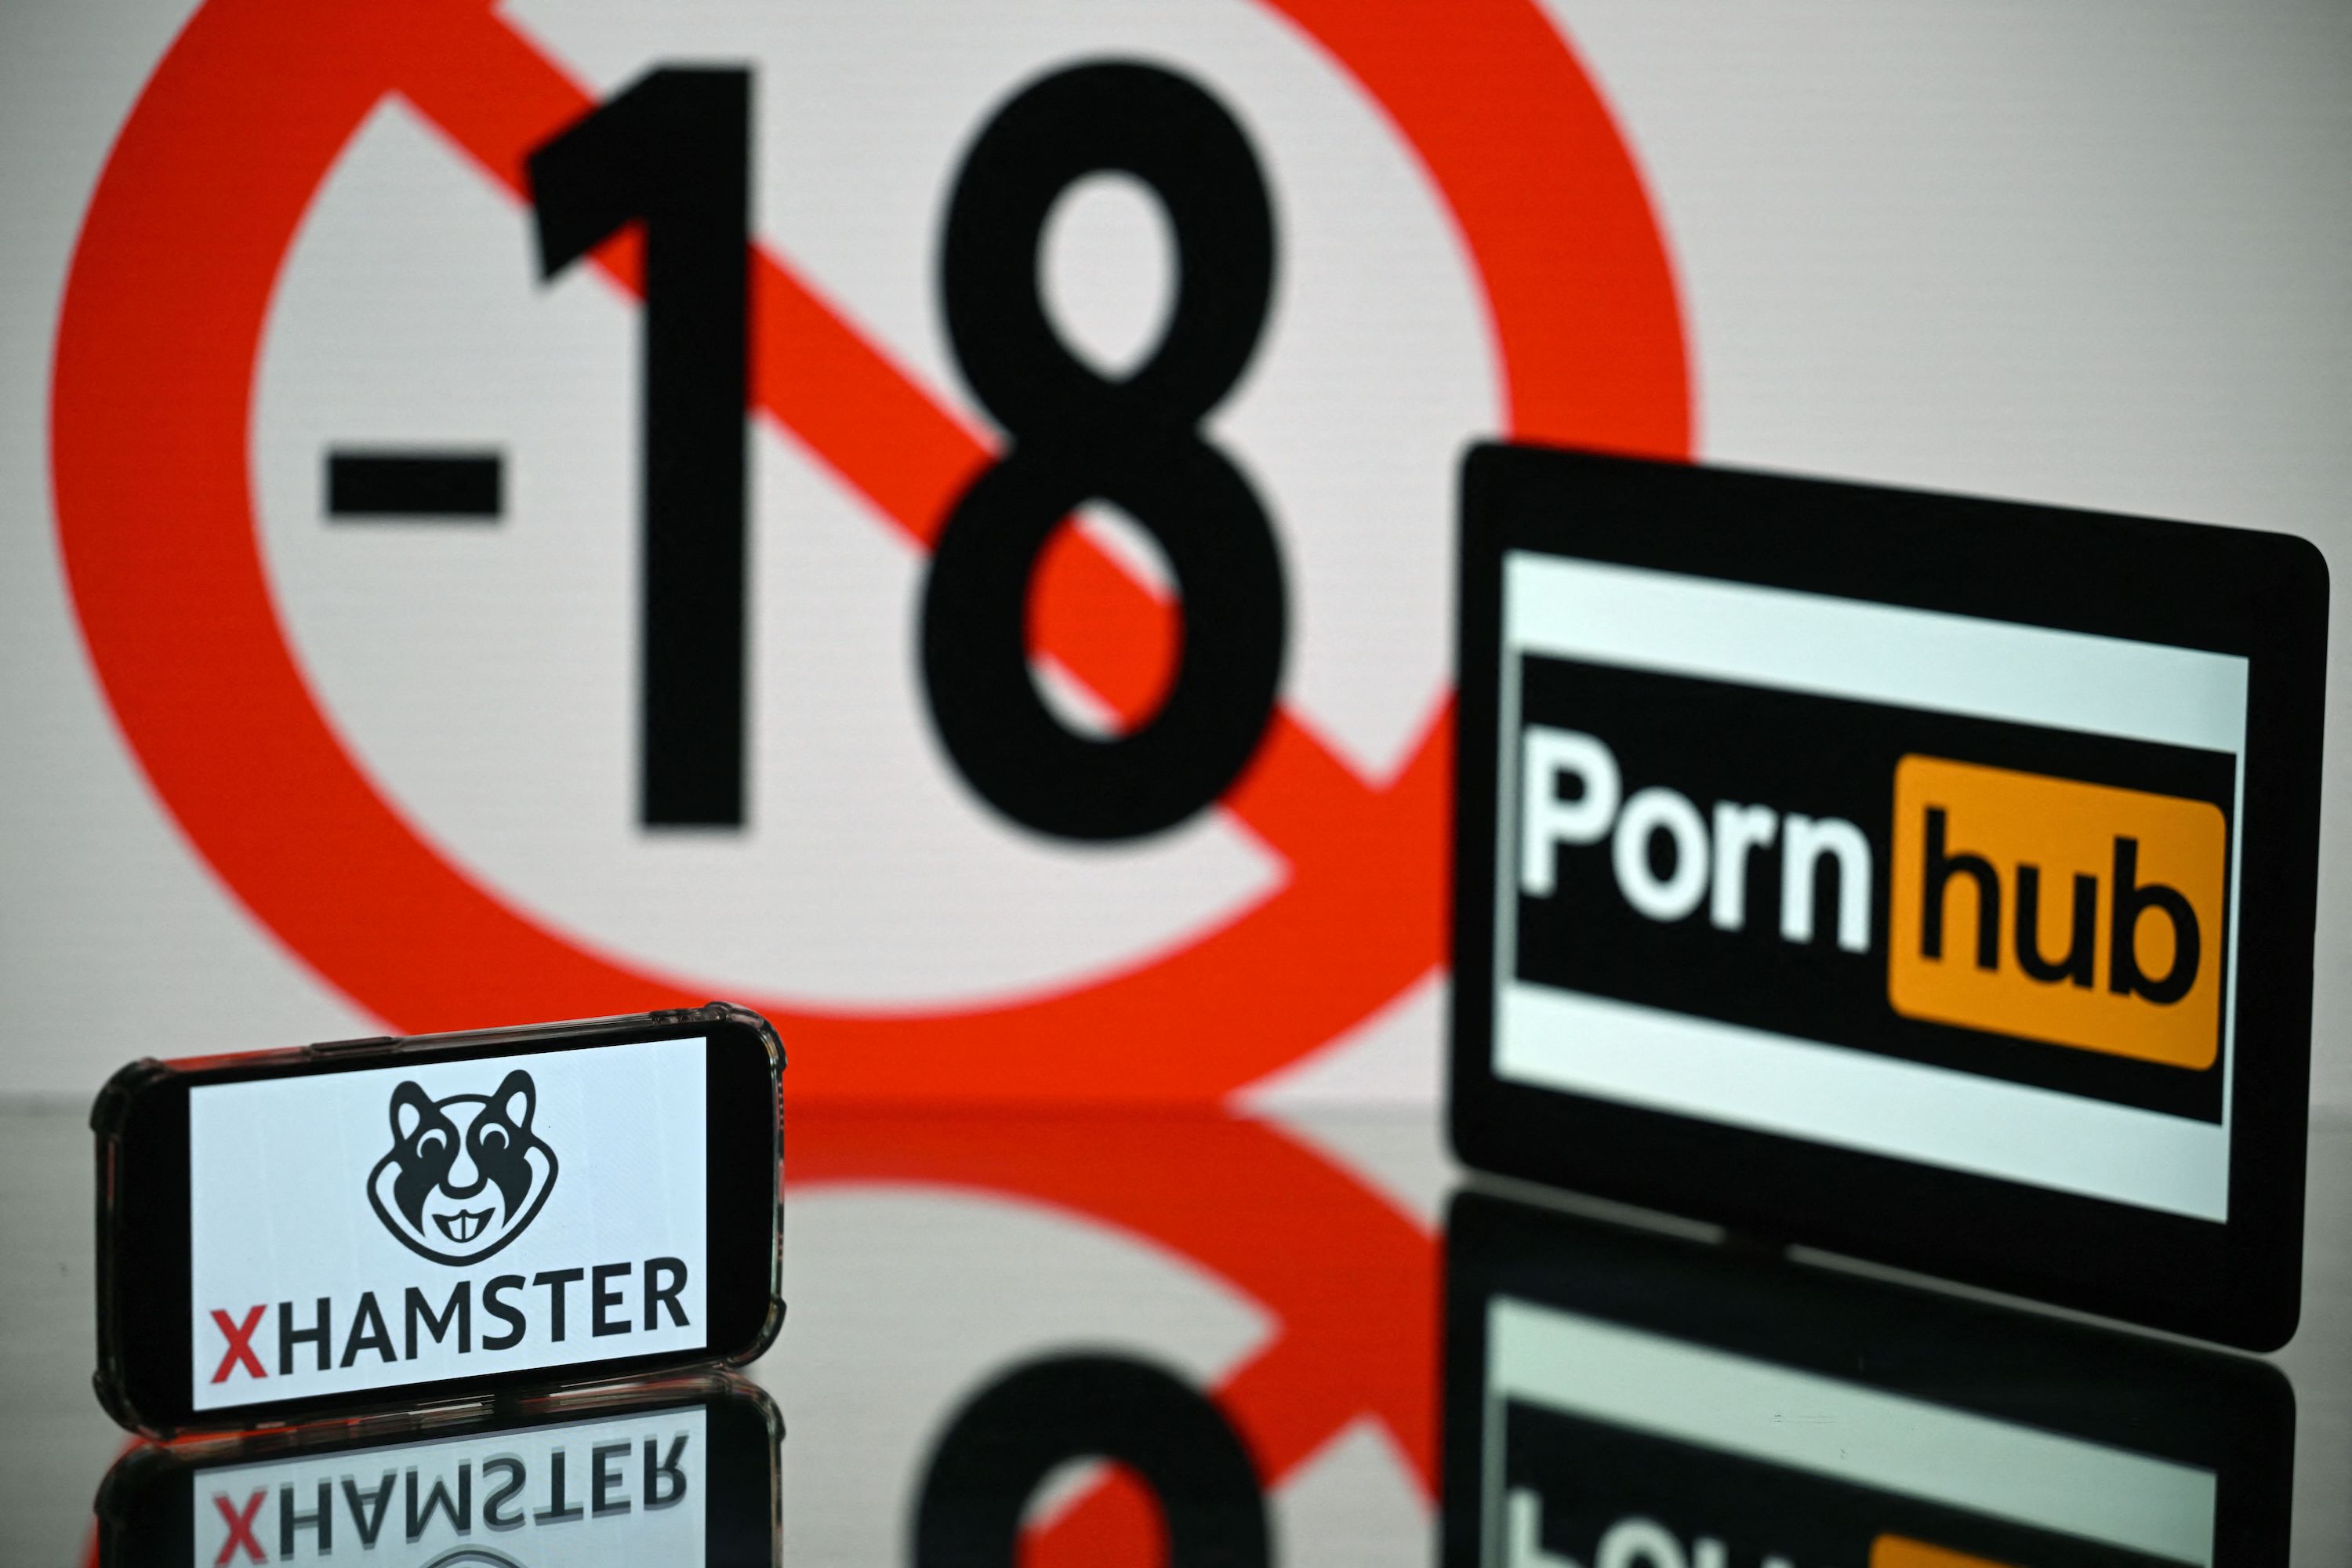 Pronhun Com - Why Are Visa And Mastercard Still Doing Business with Pornhub? | Opinion